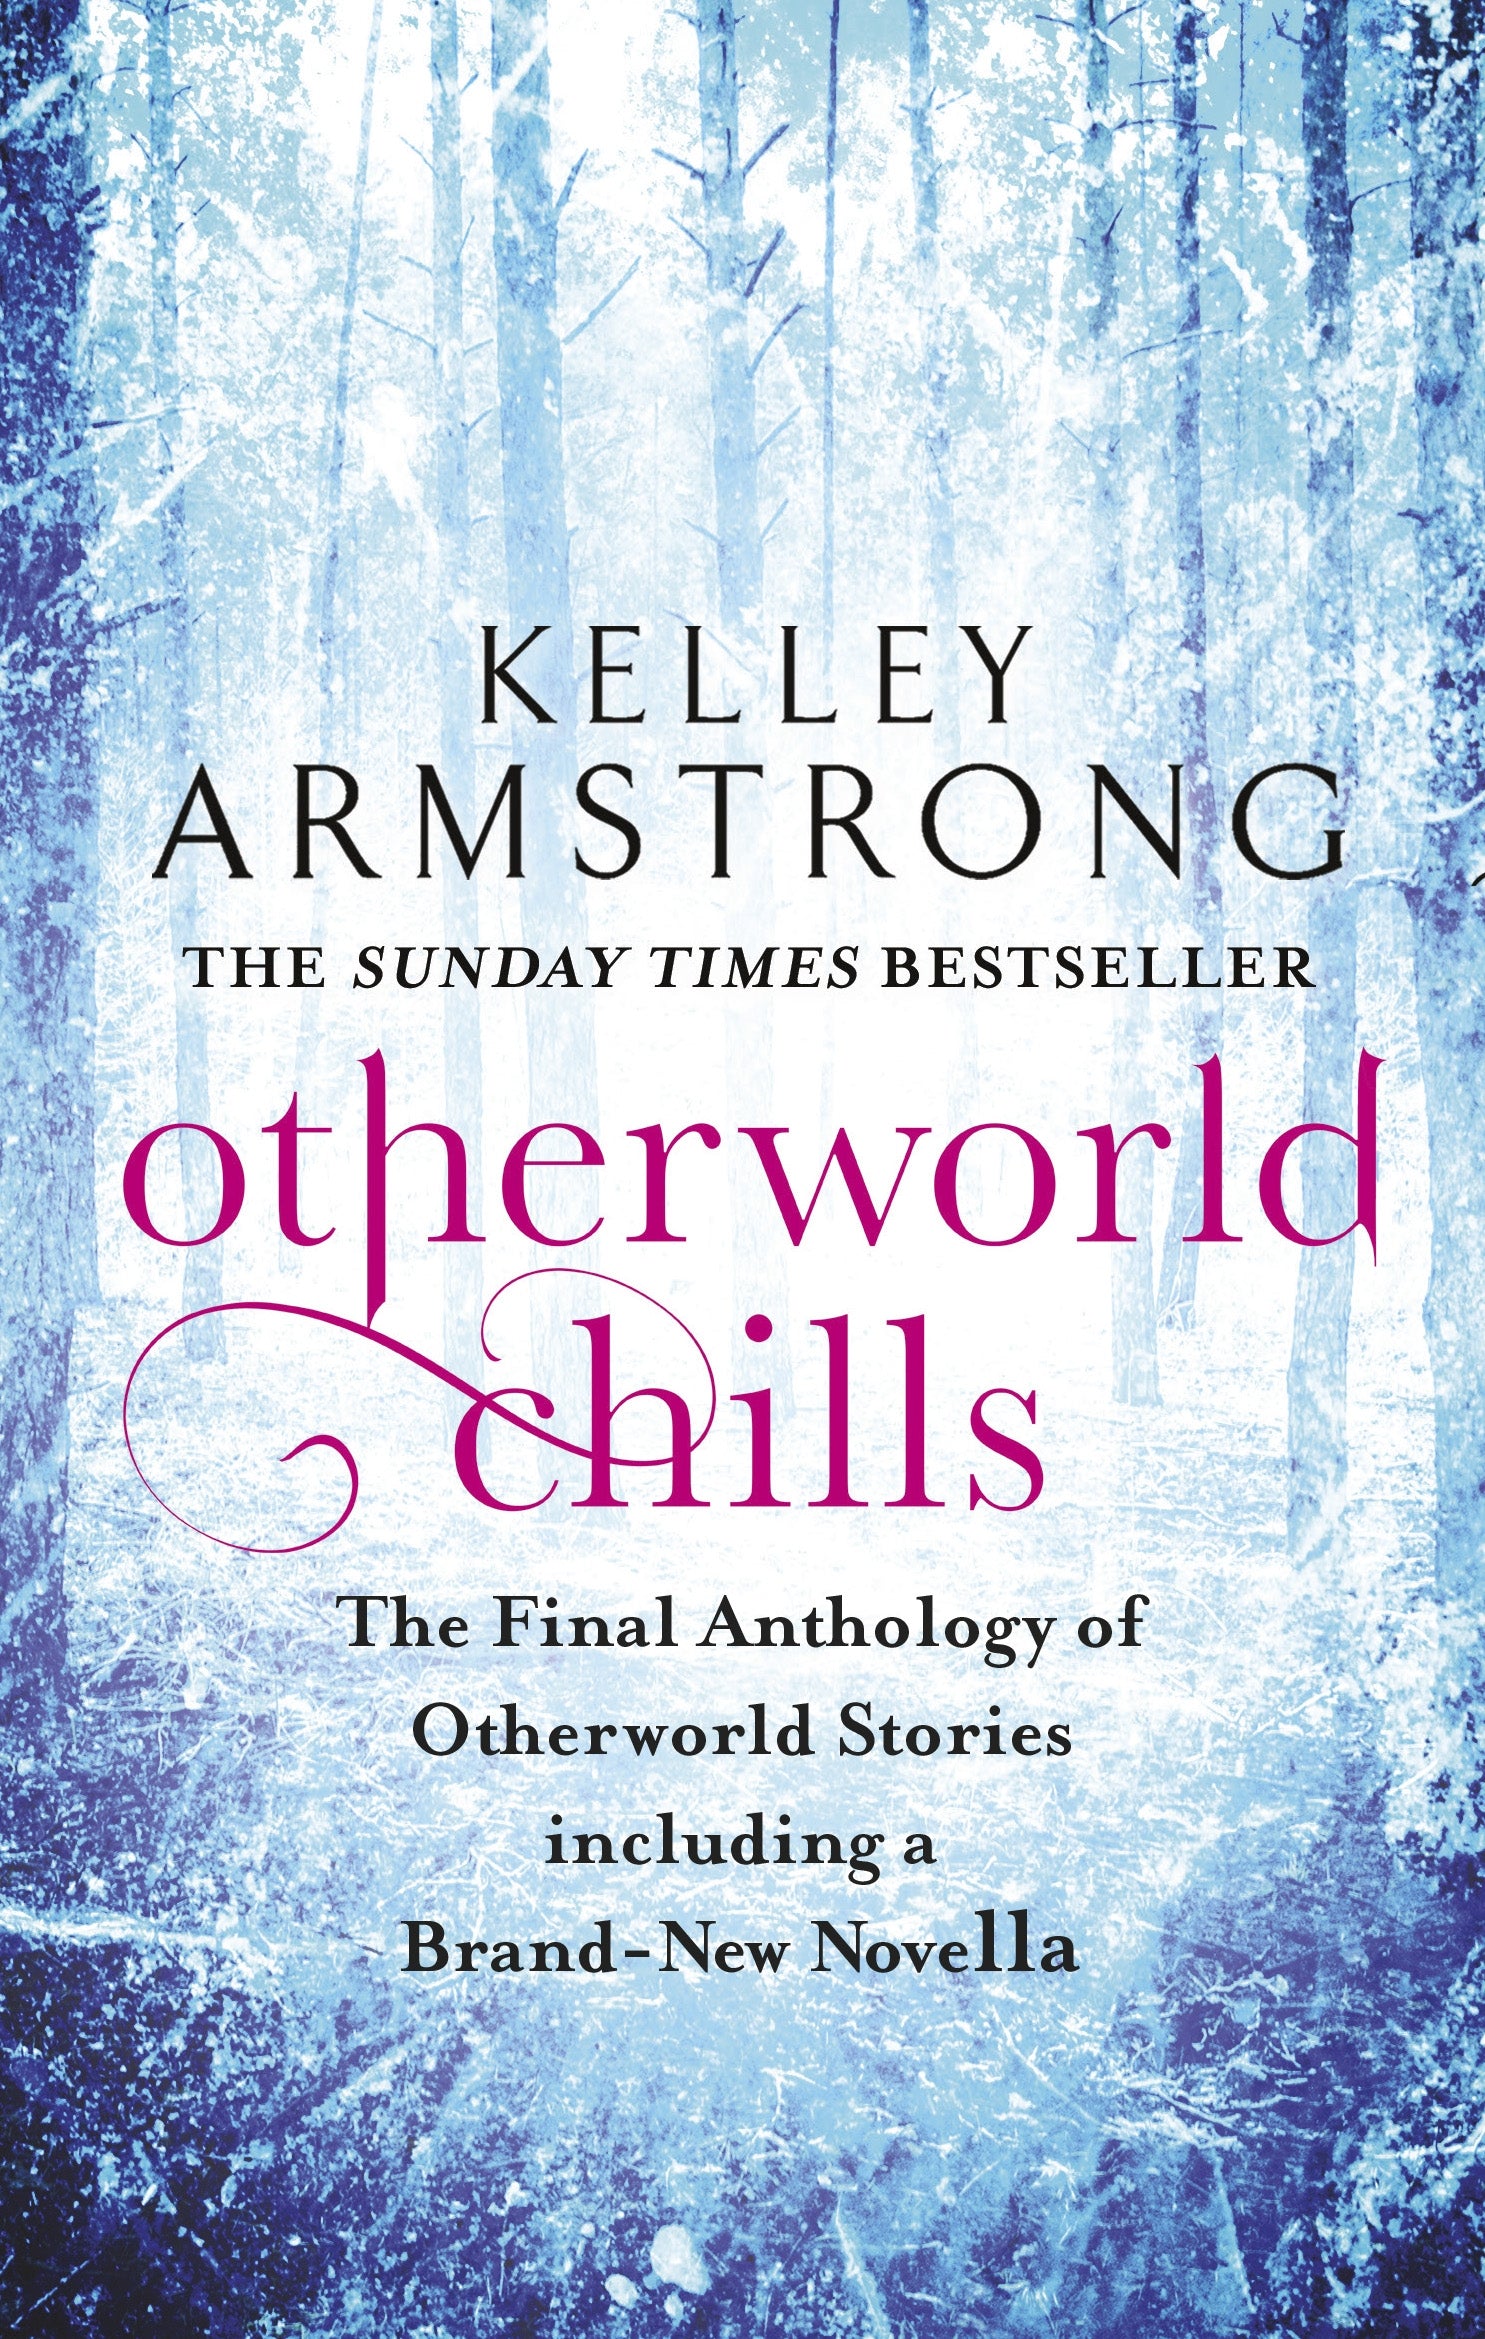 Otherworld Chills by Kelley Armstrong